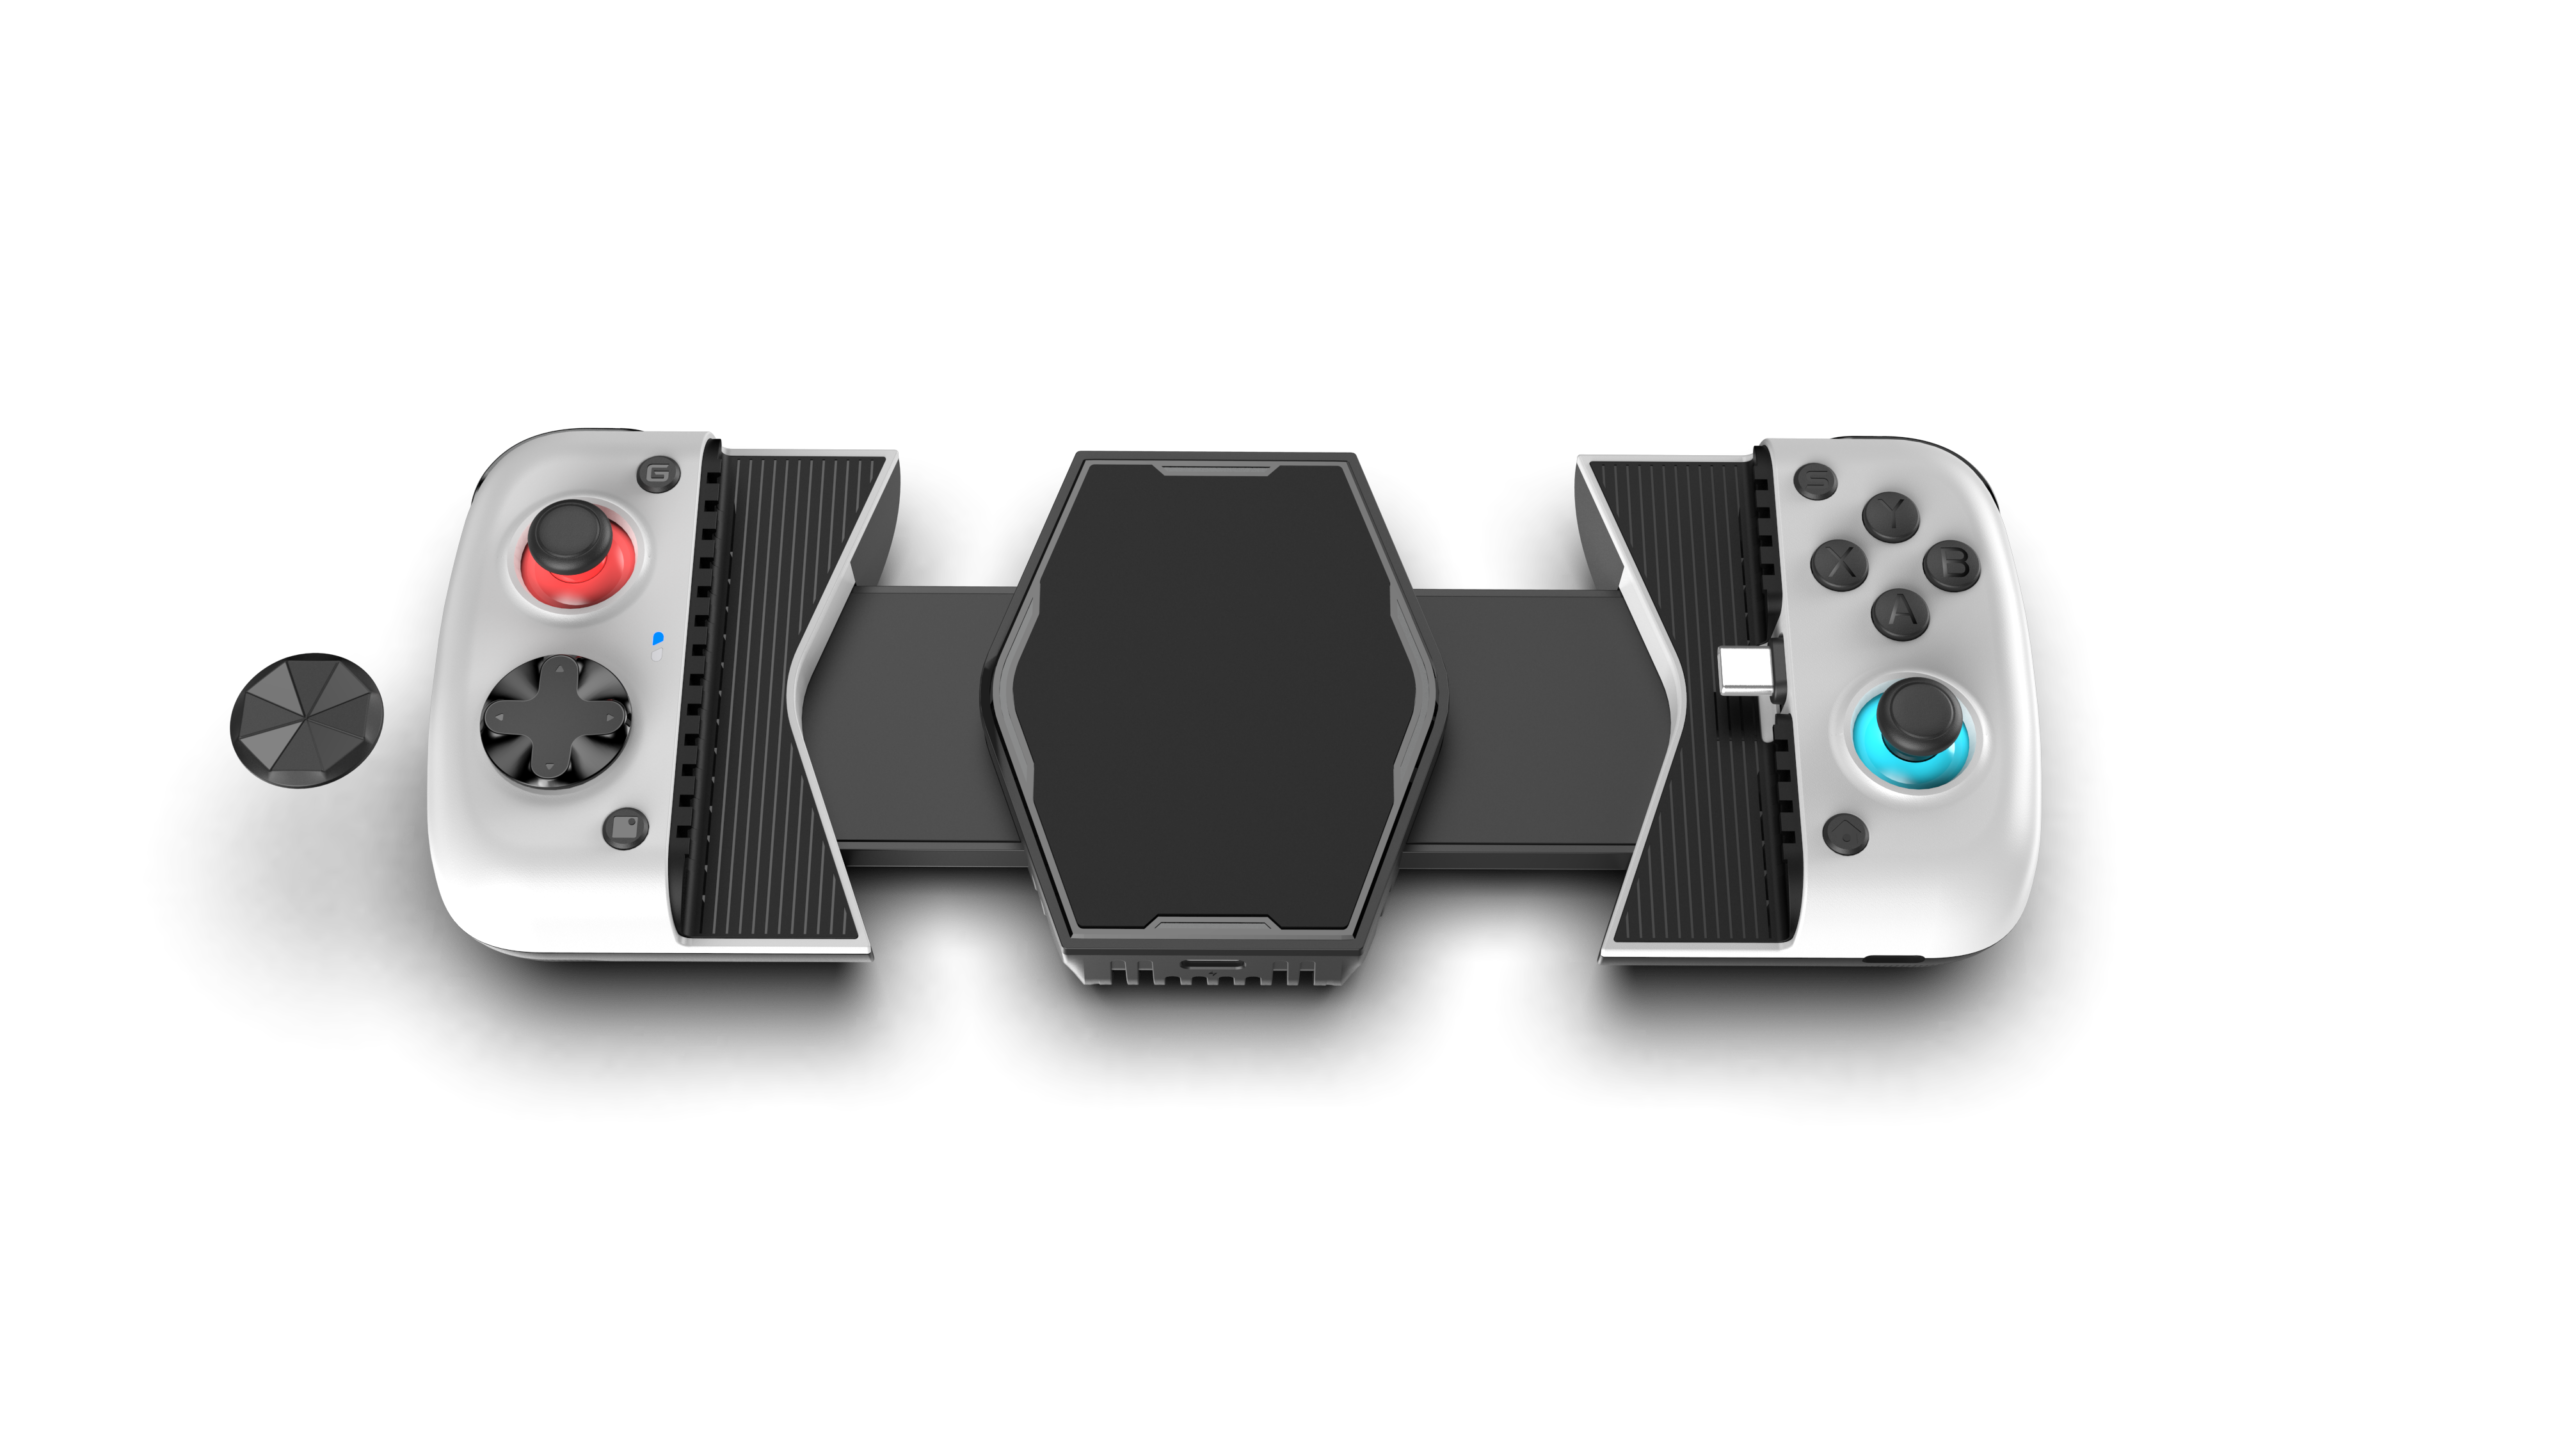 GameSir launches its X3 Type C Peltier Cooled Ergonomic Mobile Gaming Controller.